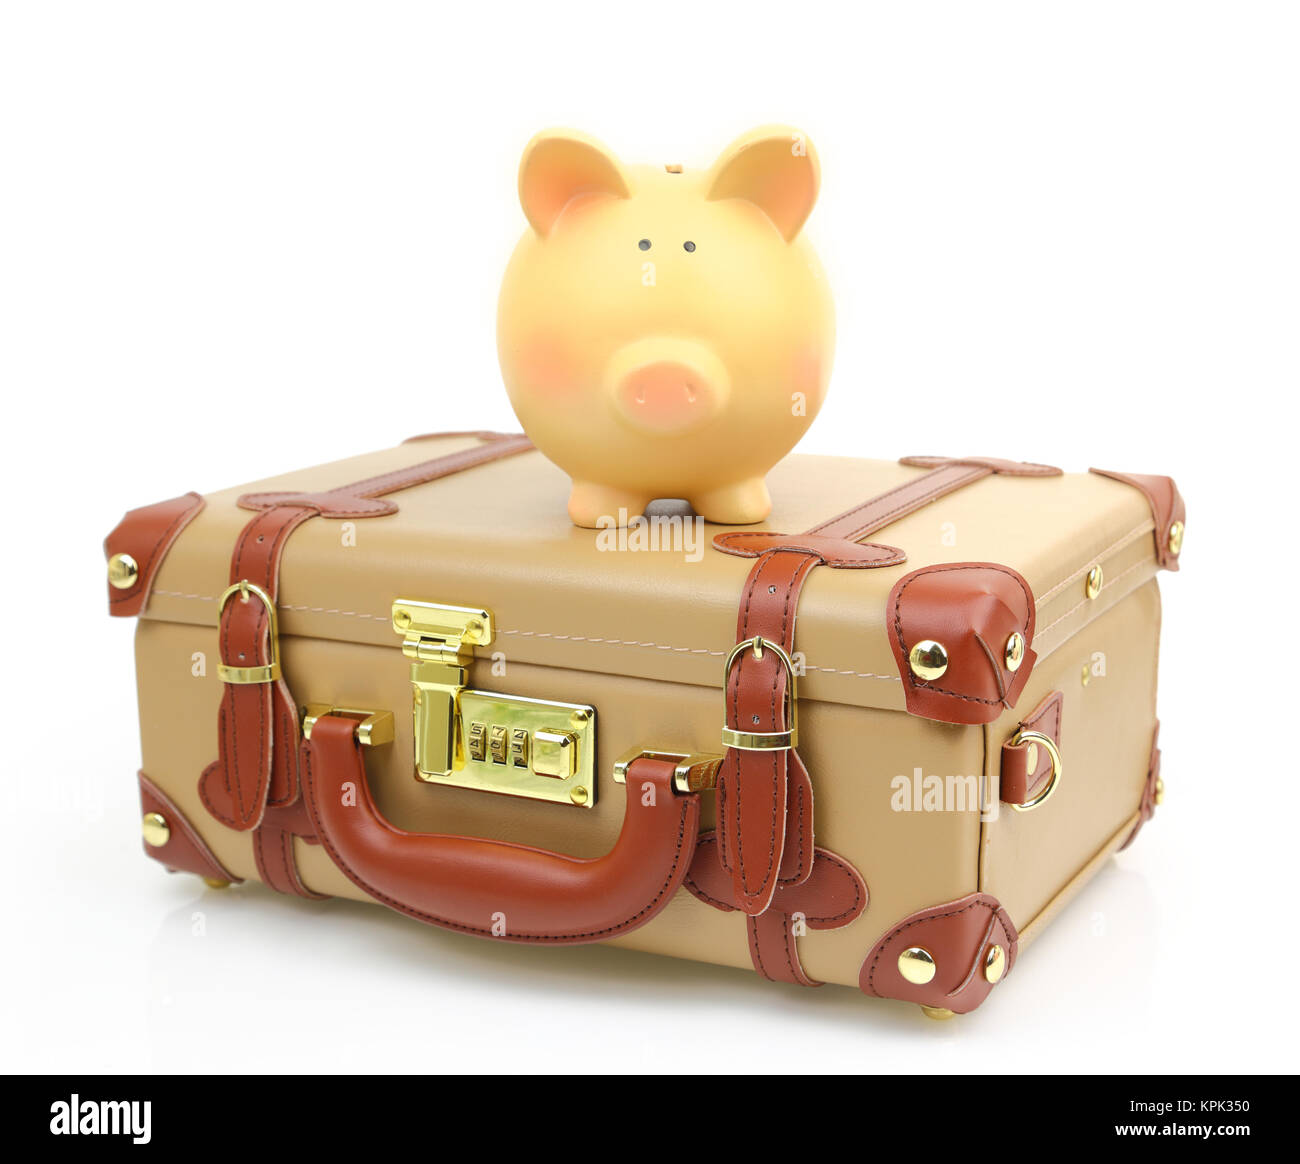 Closed brown suitcase with piggy bank on top of it Stock Photo